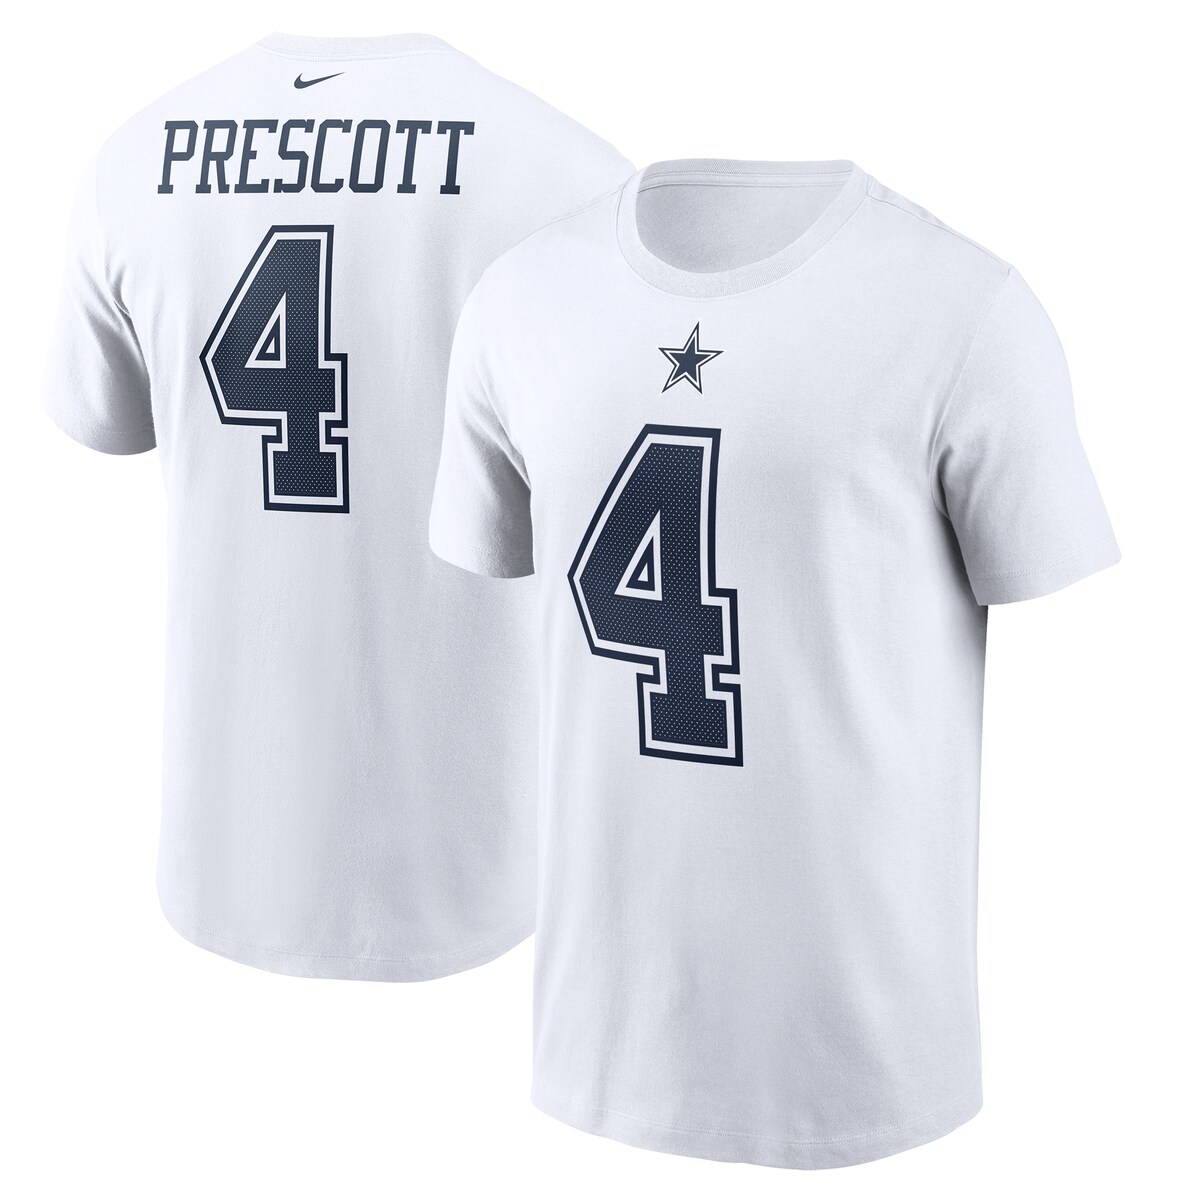 When the Dallas Cowboys are hitting the field, you'll be ready to rep your squad with this Dak Prescott Name & Number T-...